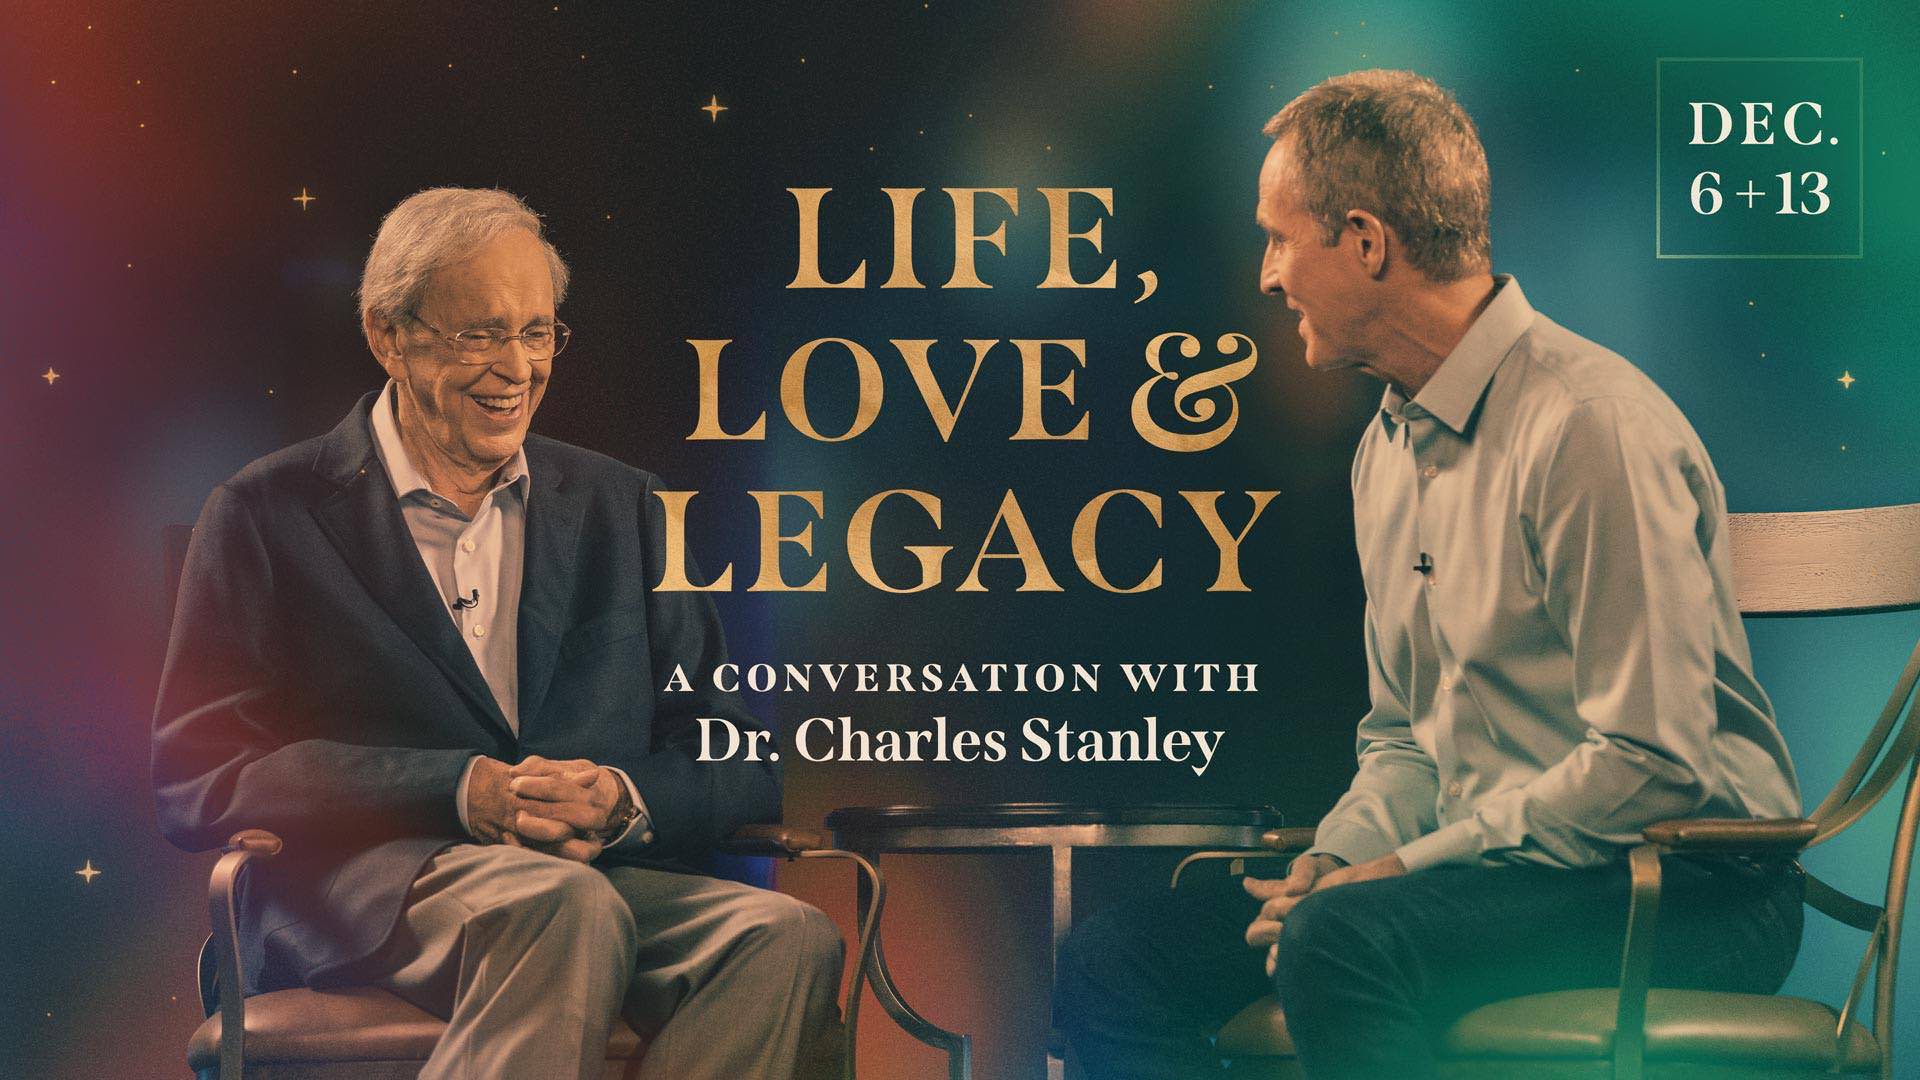 Life, Love & Legacy: A Conversation with Dr. Charles Stanley